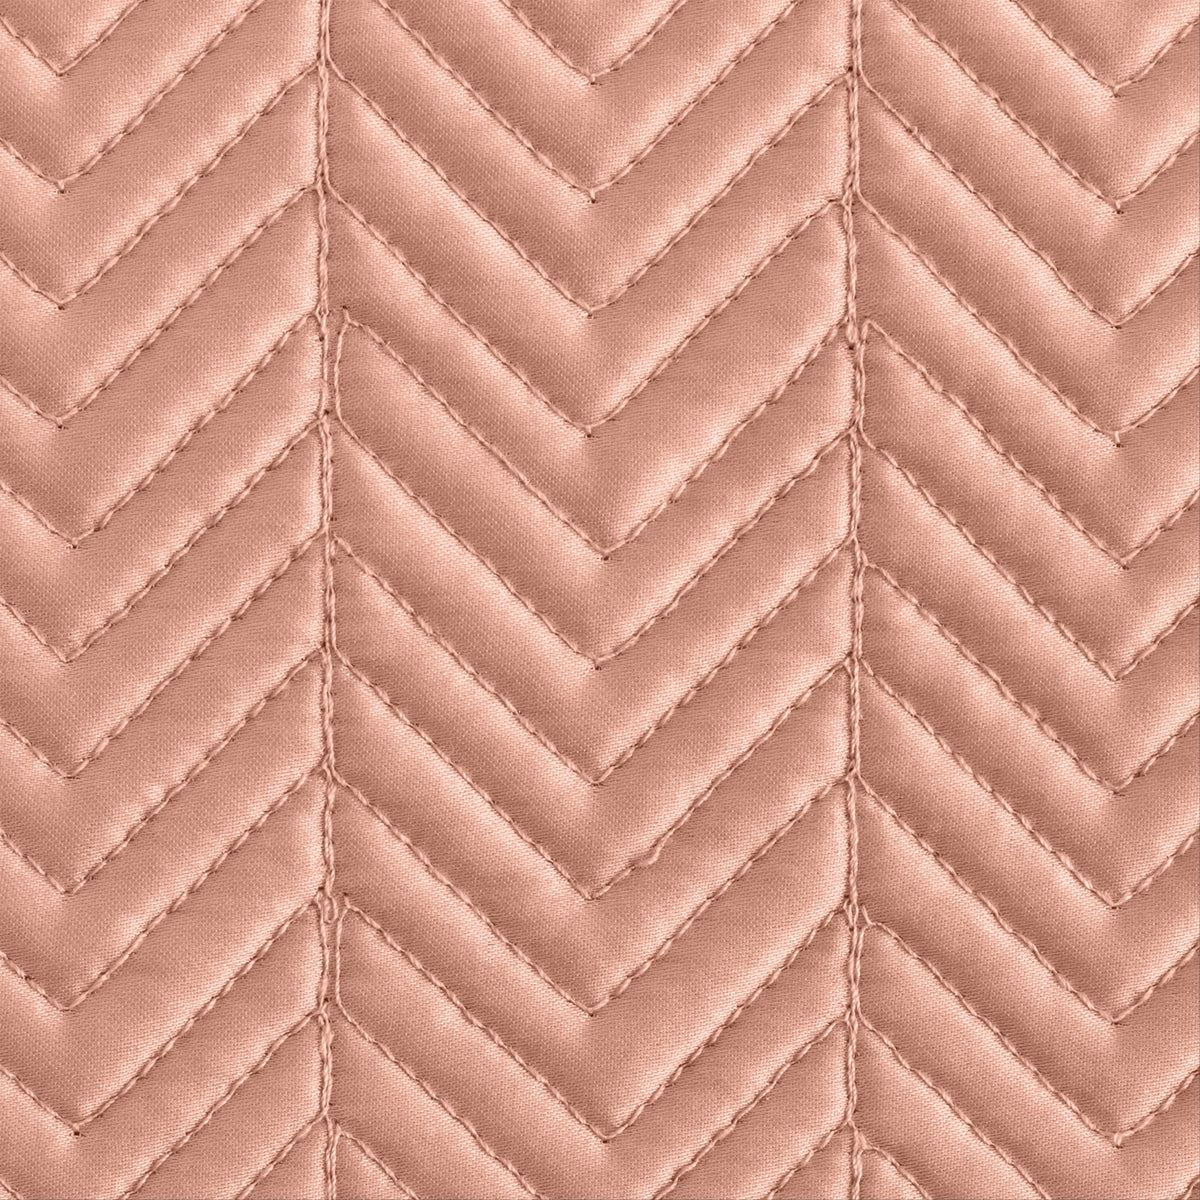 Swatch Sample of Matouk Netto Bedding in Shell Color